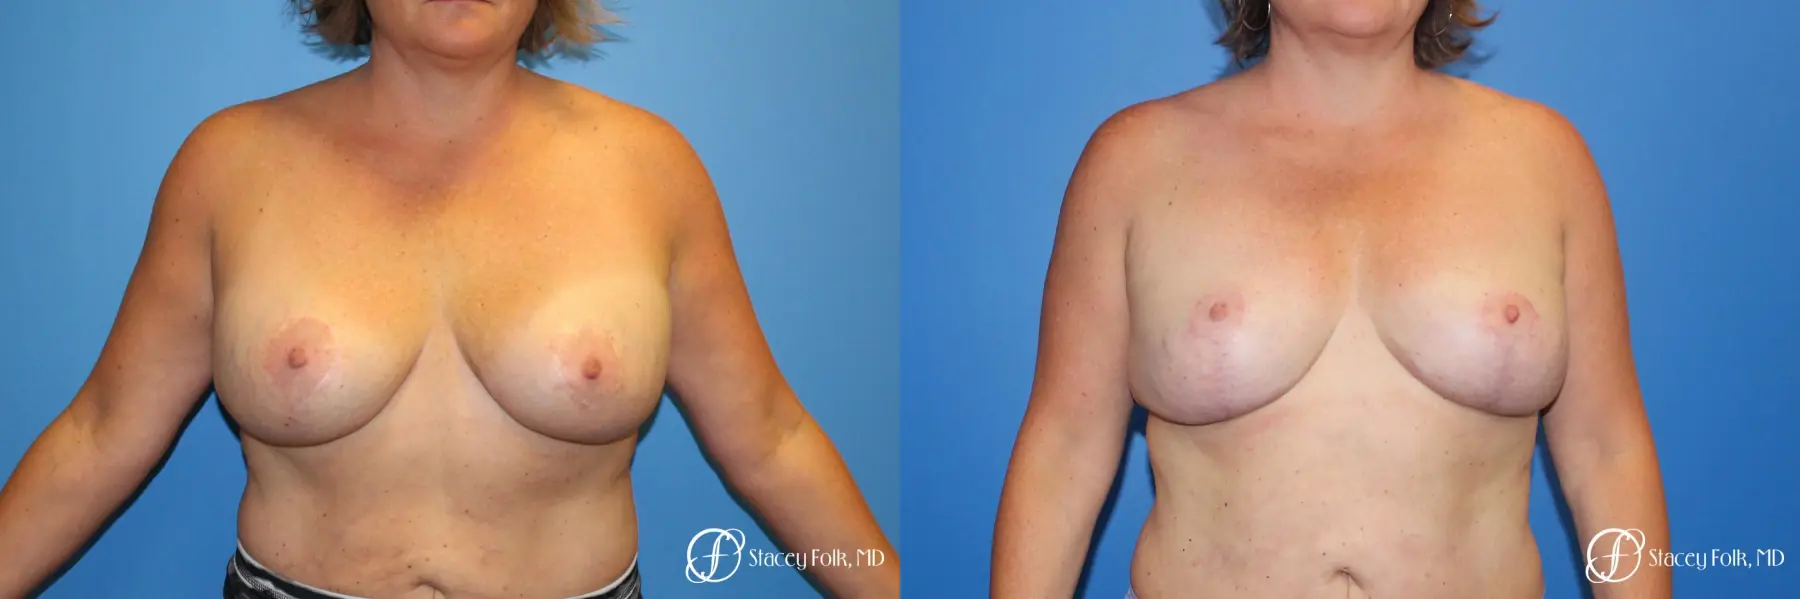 Breast Revision - Removal of Implant, Fat Transfer, Breast Lift (Mastopexy) - Before and After 1